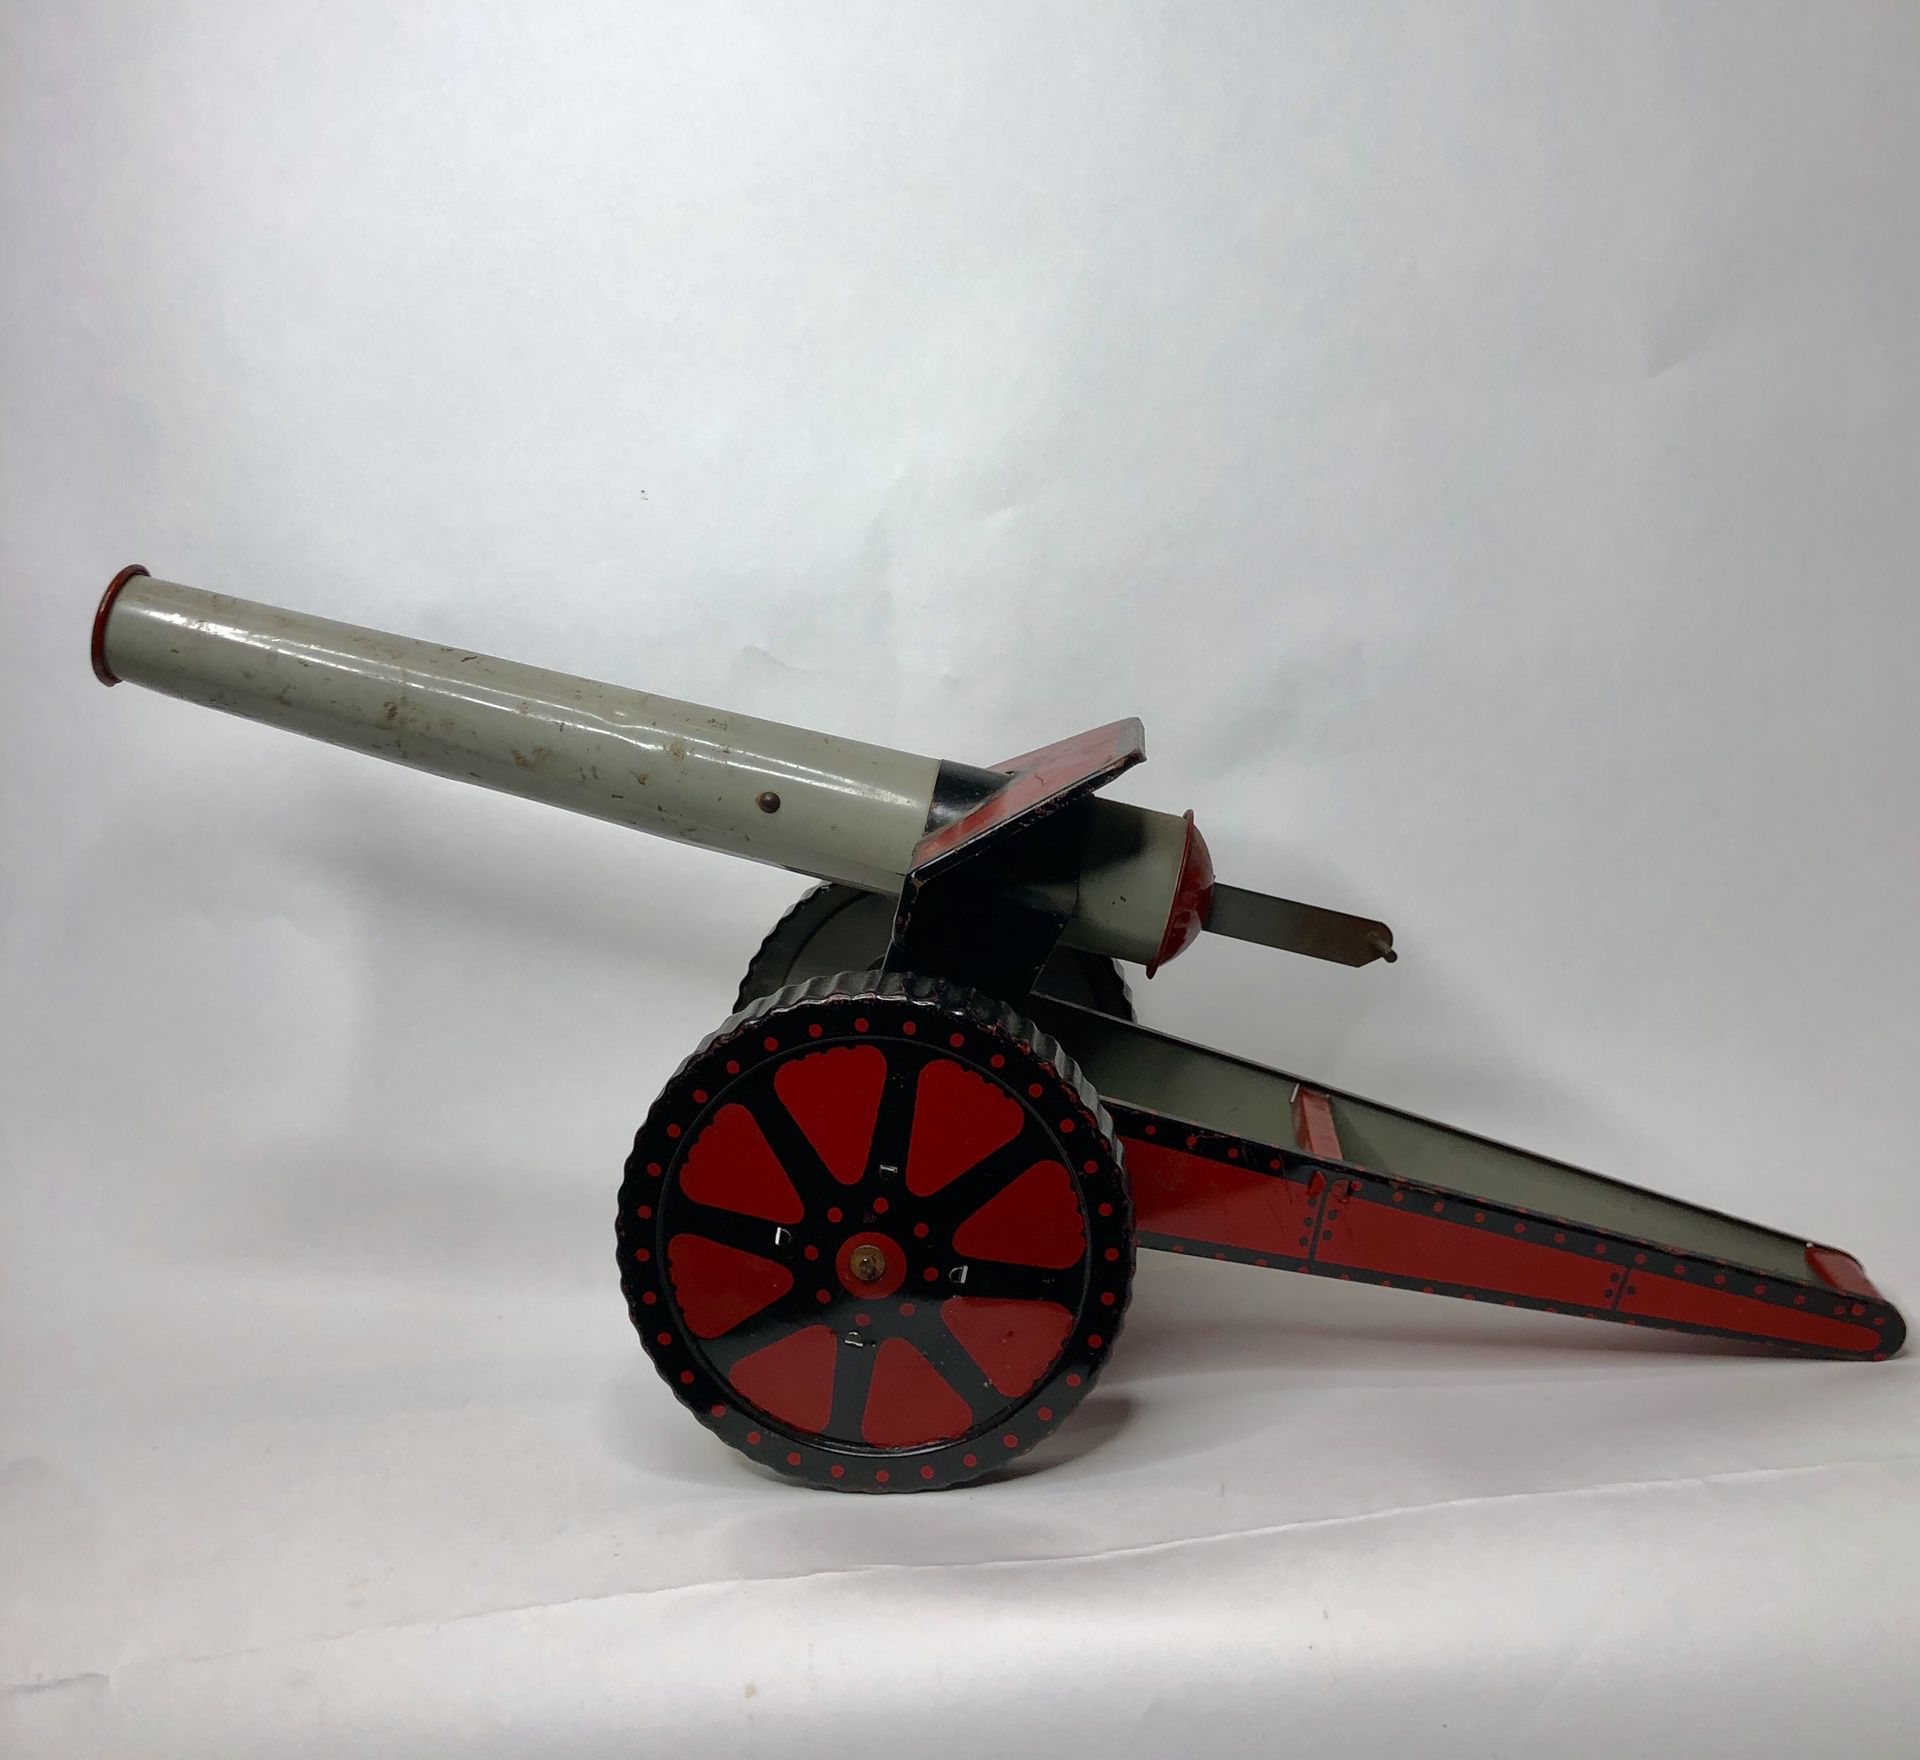 Antique 1930’s Tin Toy Cannon - Woodhaven Metal Stamping Co Collectible WORKS - Excellent Condition